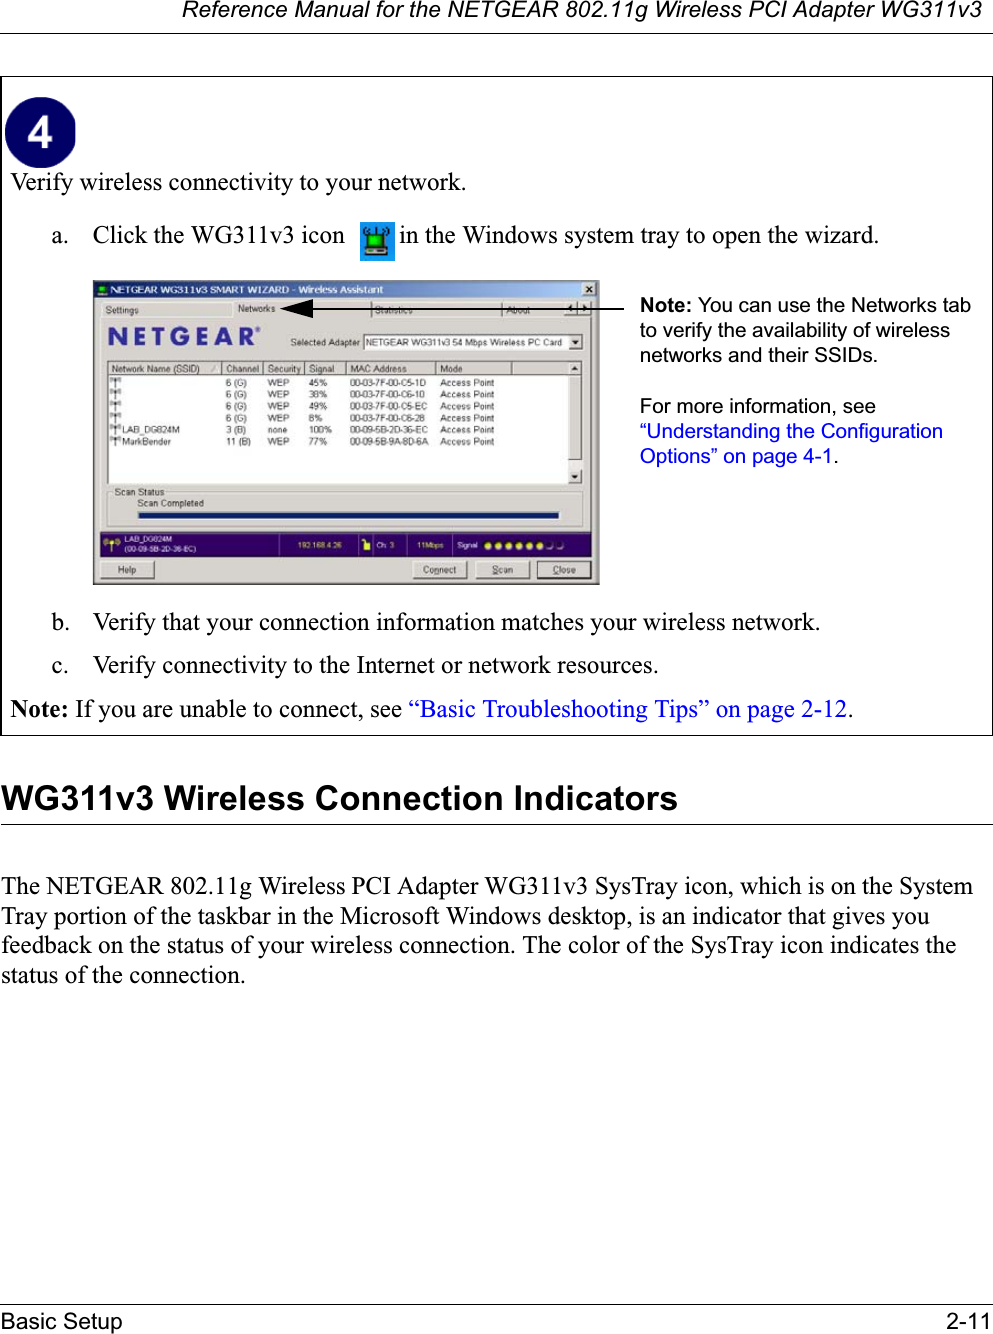 Reference Manual for the NETGEAR 802.11g Wireless PCI Adapter WG311v3Basic Setup 2-11WG311v3 Wireless Connection Indicators The NETGEAR 802.11g Wireless PCI Adapter WG311v3 SysTray icon, which is on the SystemTray portion of the taskbar in the Microsoft Windows desktop, is an indicator that gives you feedback on the status of your wireless connection. The color of the SysTray icon indicates the status of the connection.Verify wireless connectivity to your network.a. Click the WG311v3 icon  in the Windows system tray to open the wizard.b. Verify that your connection information matches your wireless network. c. Verify connectivity to the Internet or network resources.Note: If you are unable to connect, see “Basic Troubleshooting Tips” on page 2-12.Note: You can use the Networks tab to verify the availability of wireless networks and their SSIDs. For more information, see “Understanding the Configuration Options” on page 4-1.